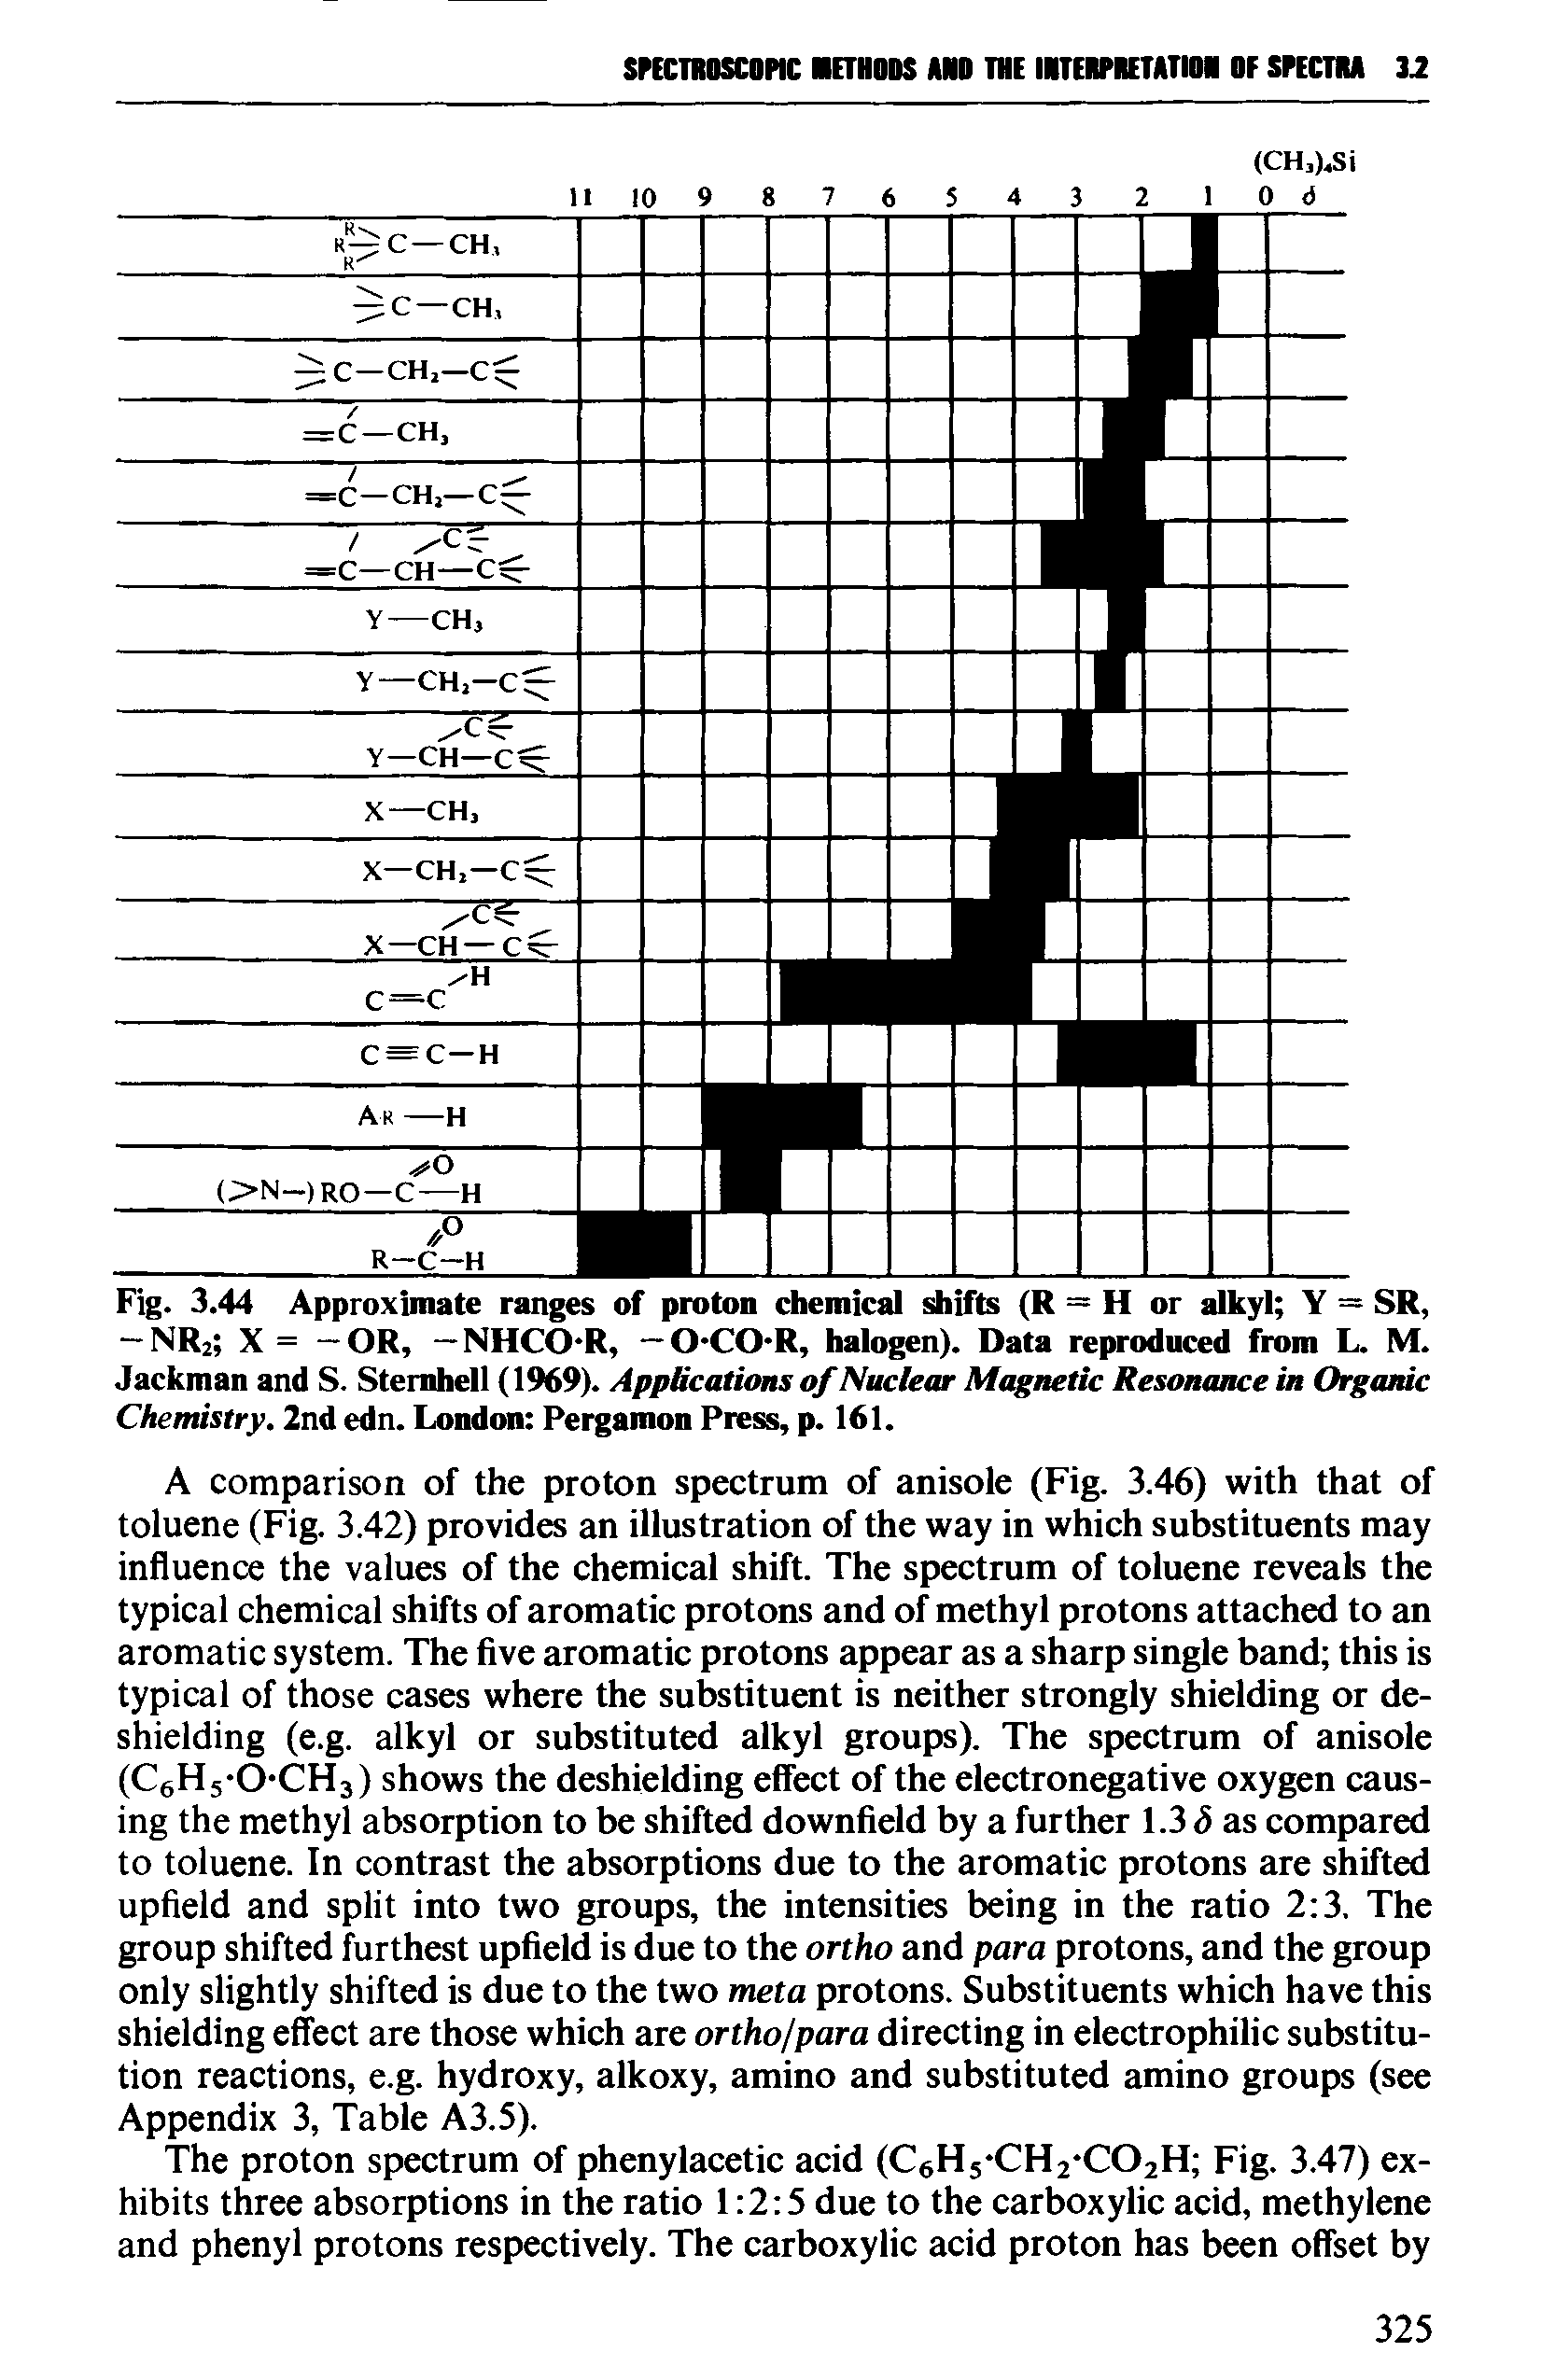 Fig. 3.44 Approximate ranges of proton chemical shifts (R = H or alkyl Y = SR, — NR2 X = OR, — NHCO-R, — 0 C0 R, halogen). Data reproduced from L. M. Jackman and S. Stemhell (1969). Applications of Nuclear Magnetic Resonance in Organic Chemistry. 2nd edn. London Pergamon Press, p. 161.